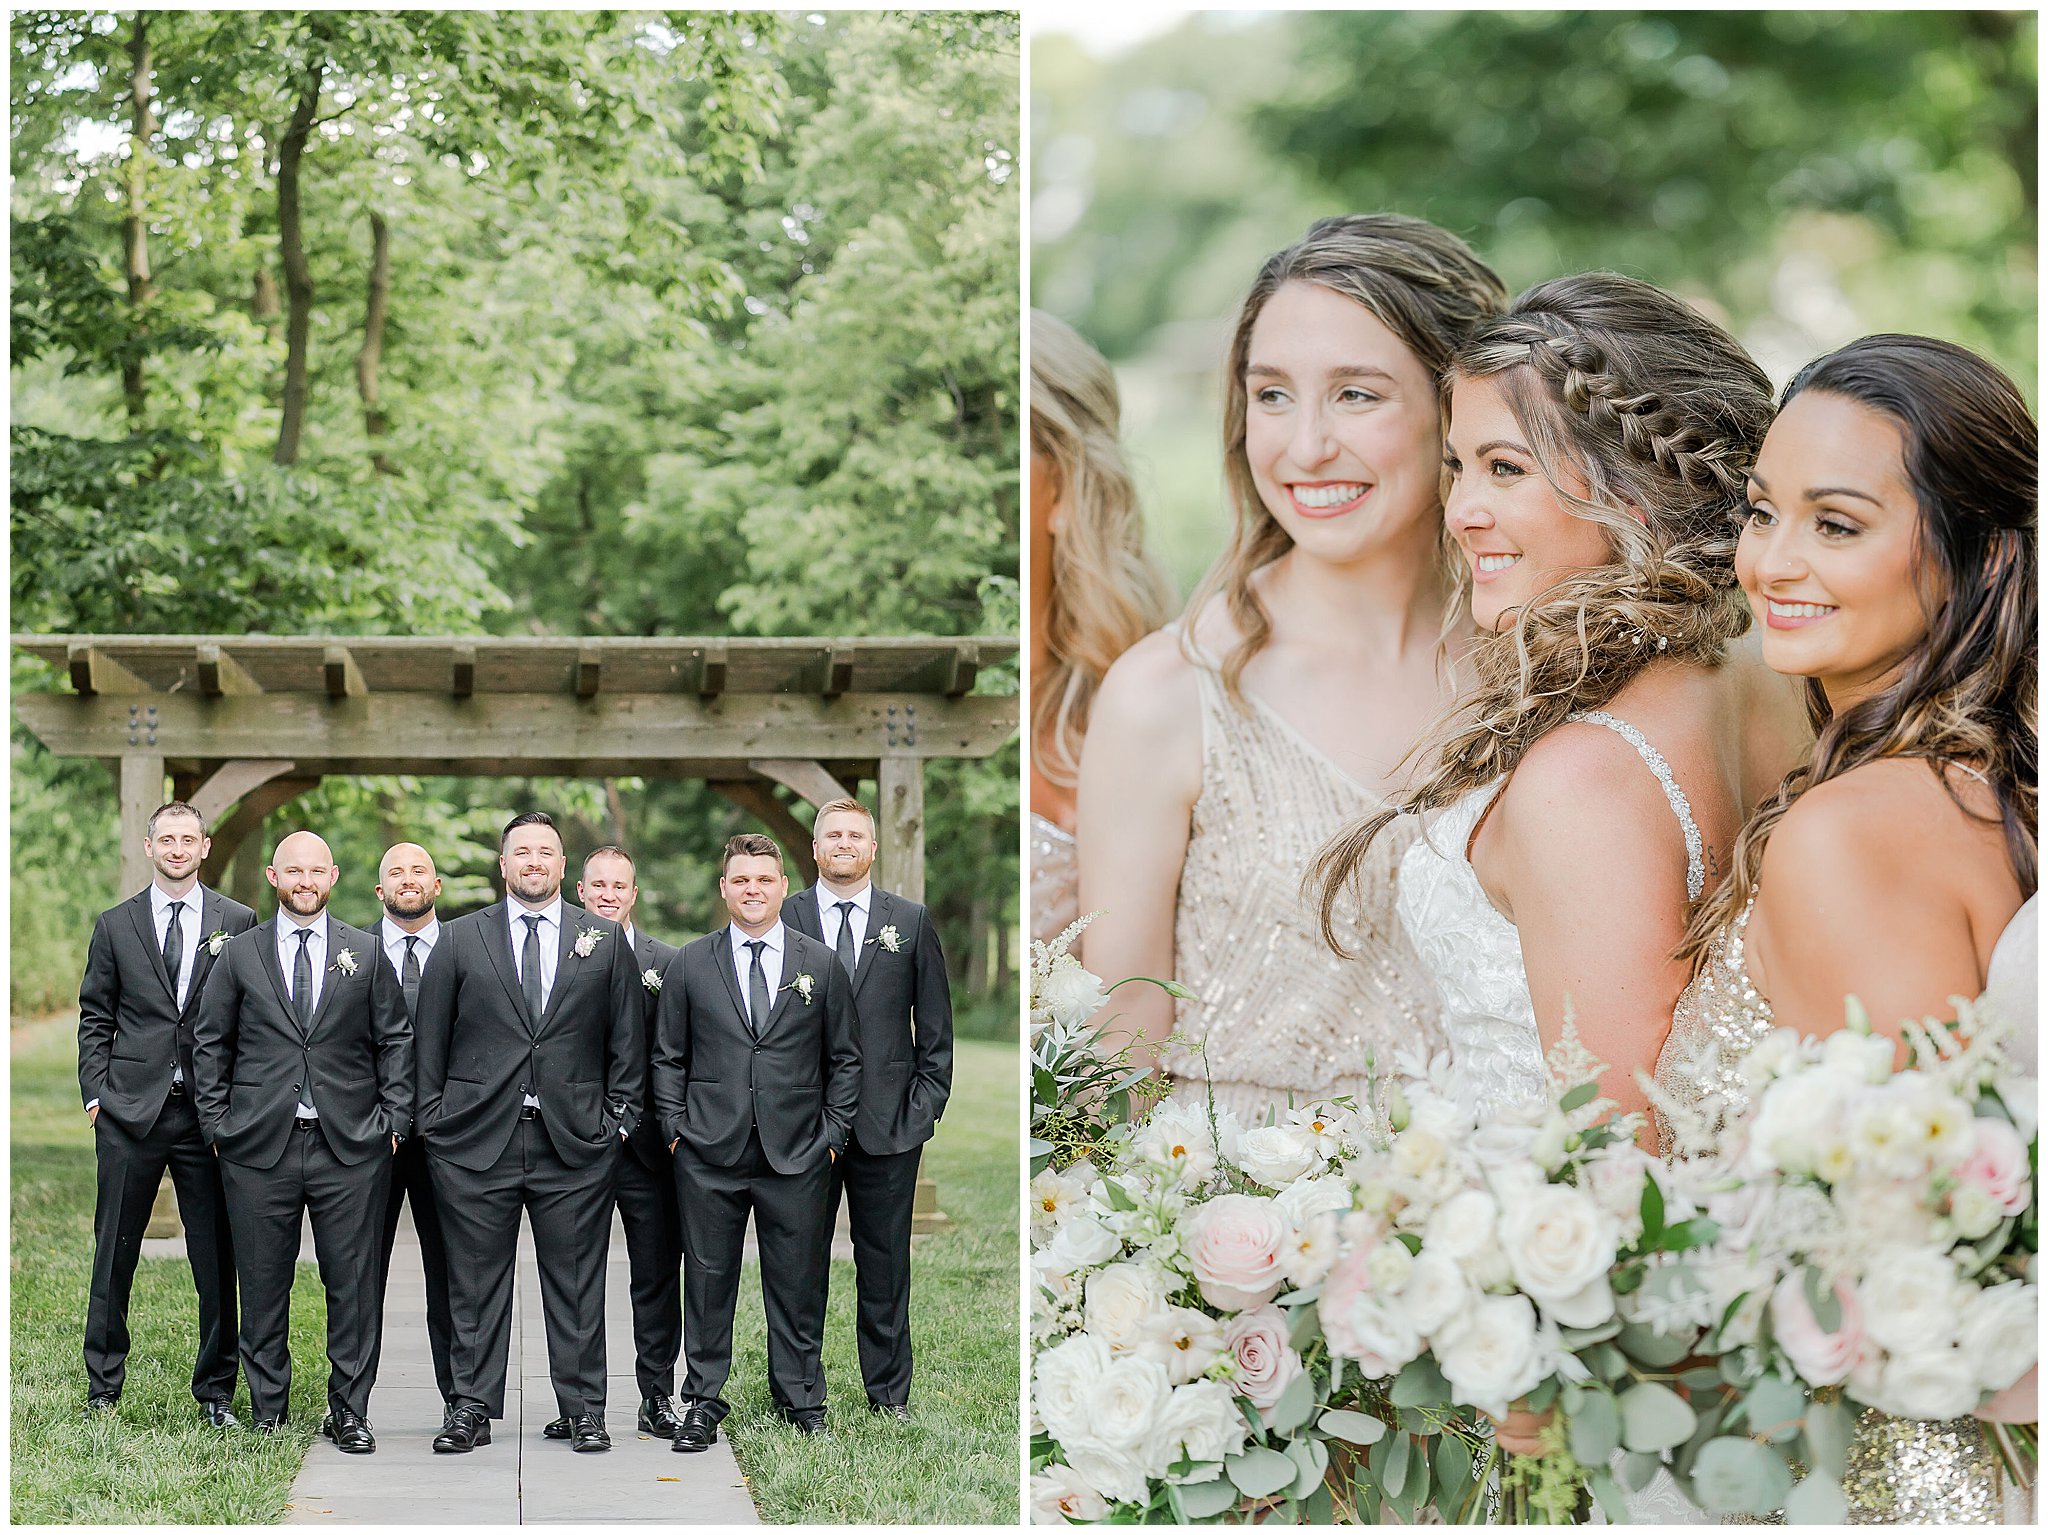 Historic Ashland Wedding | Historic Ashland Wedding Photographer | Wrightsville PA | Wrightsville PA Wedding | Wrightsville PA Wedding Venue | Bridal party Photos | Bridal Party poses